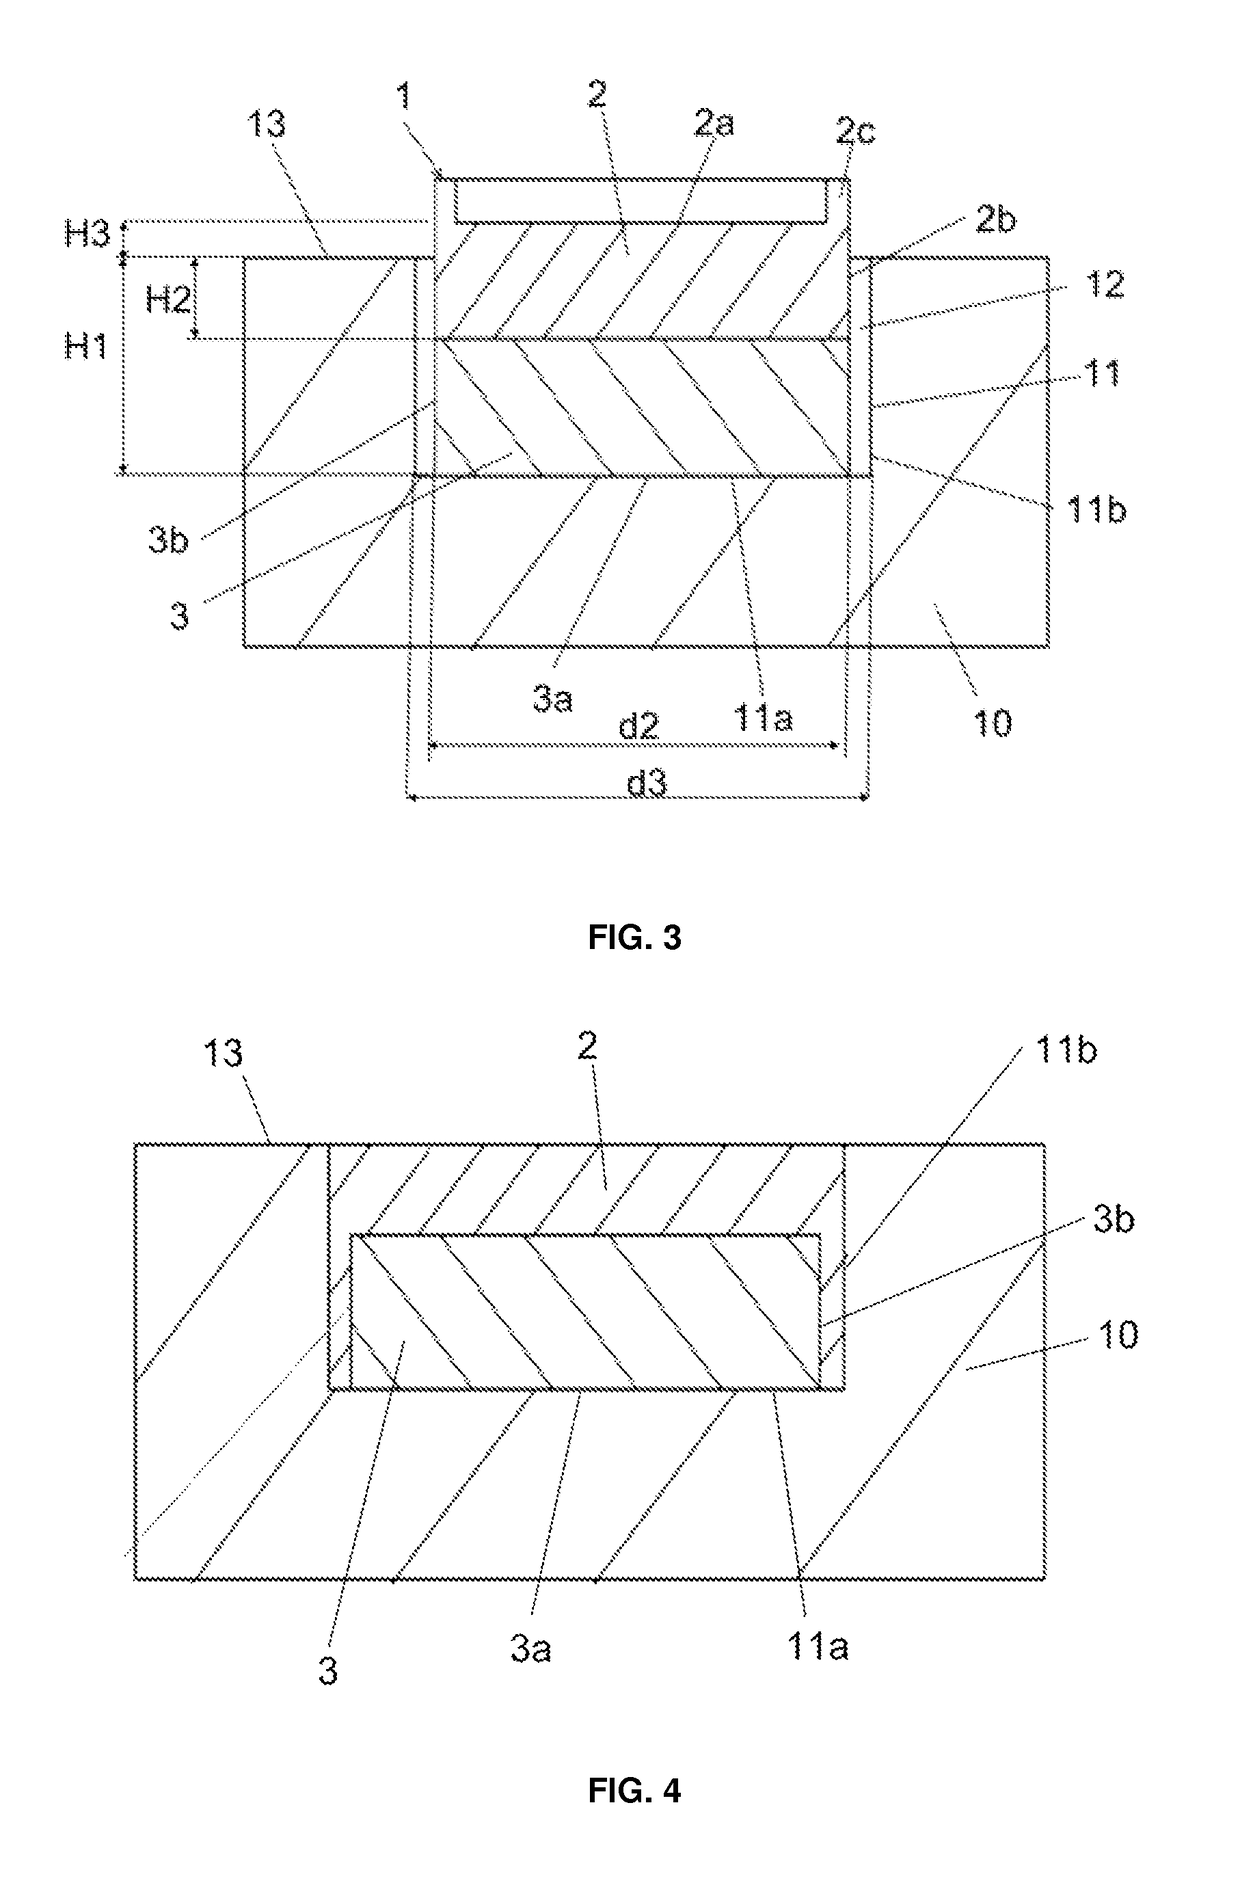 Unit comprising a formwork board including a housing and a repairing element suitable for being fixed to the housing, and repairing method of a formwork board